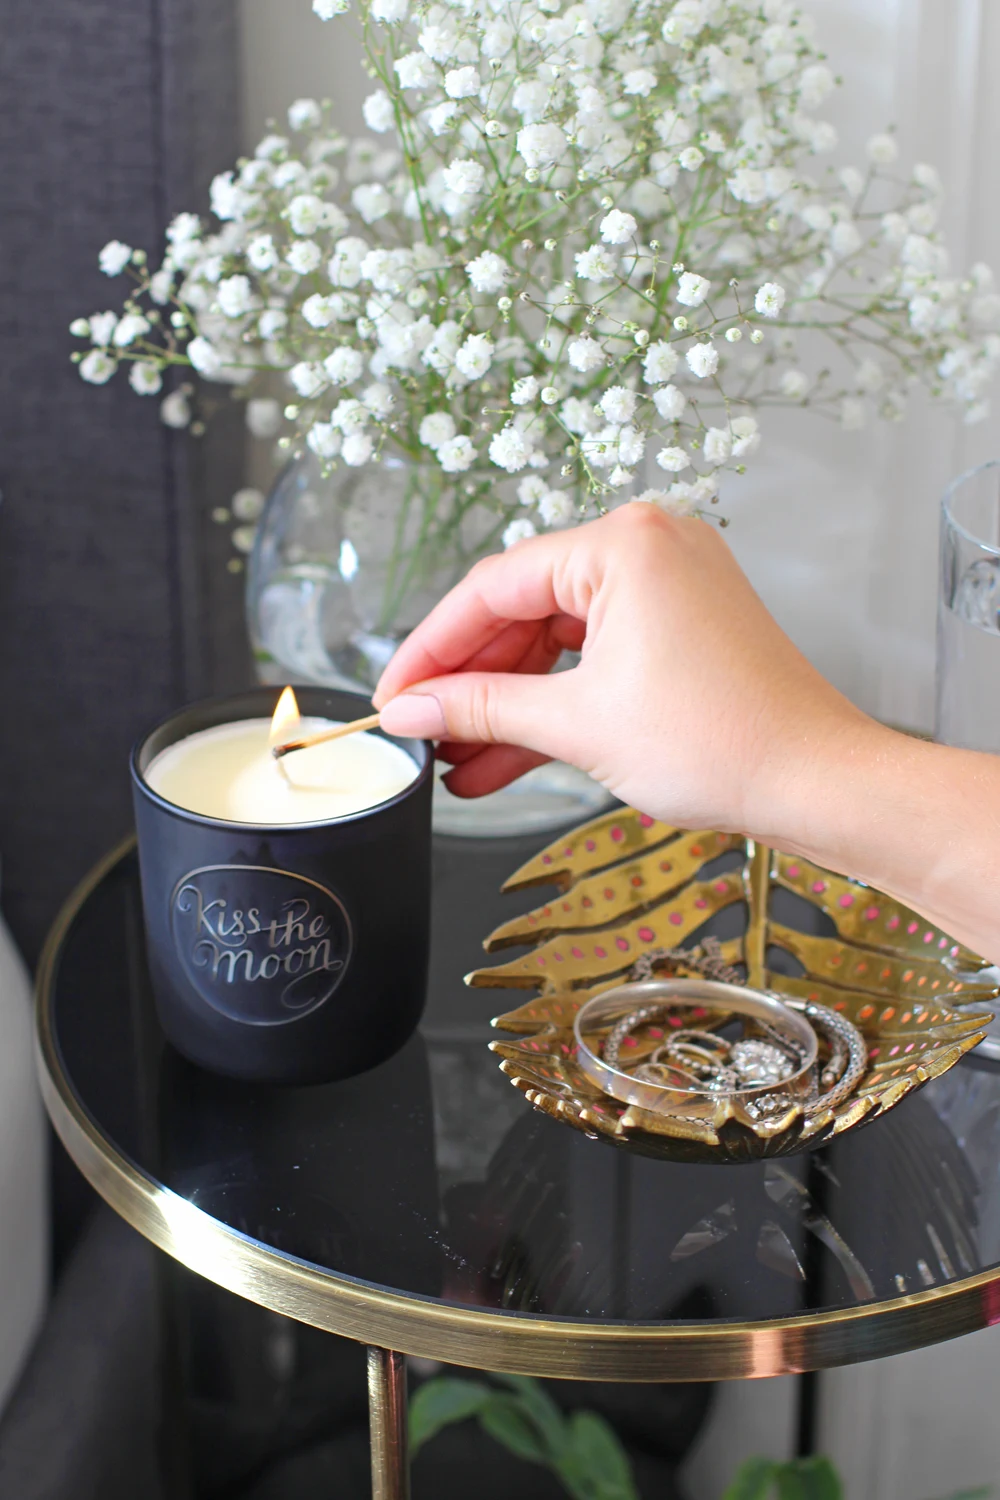 Kiss the Moon glow candle - UK lifestyle & interiors blog